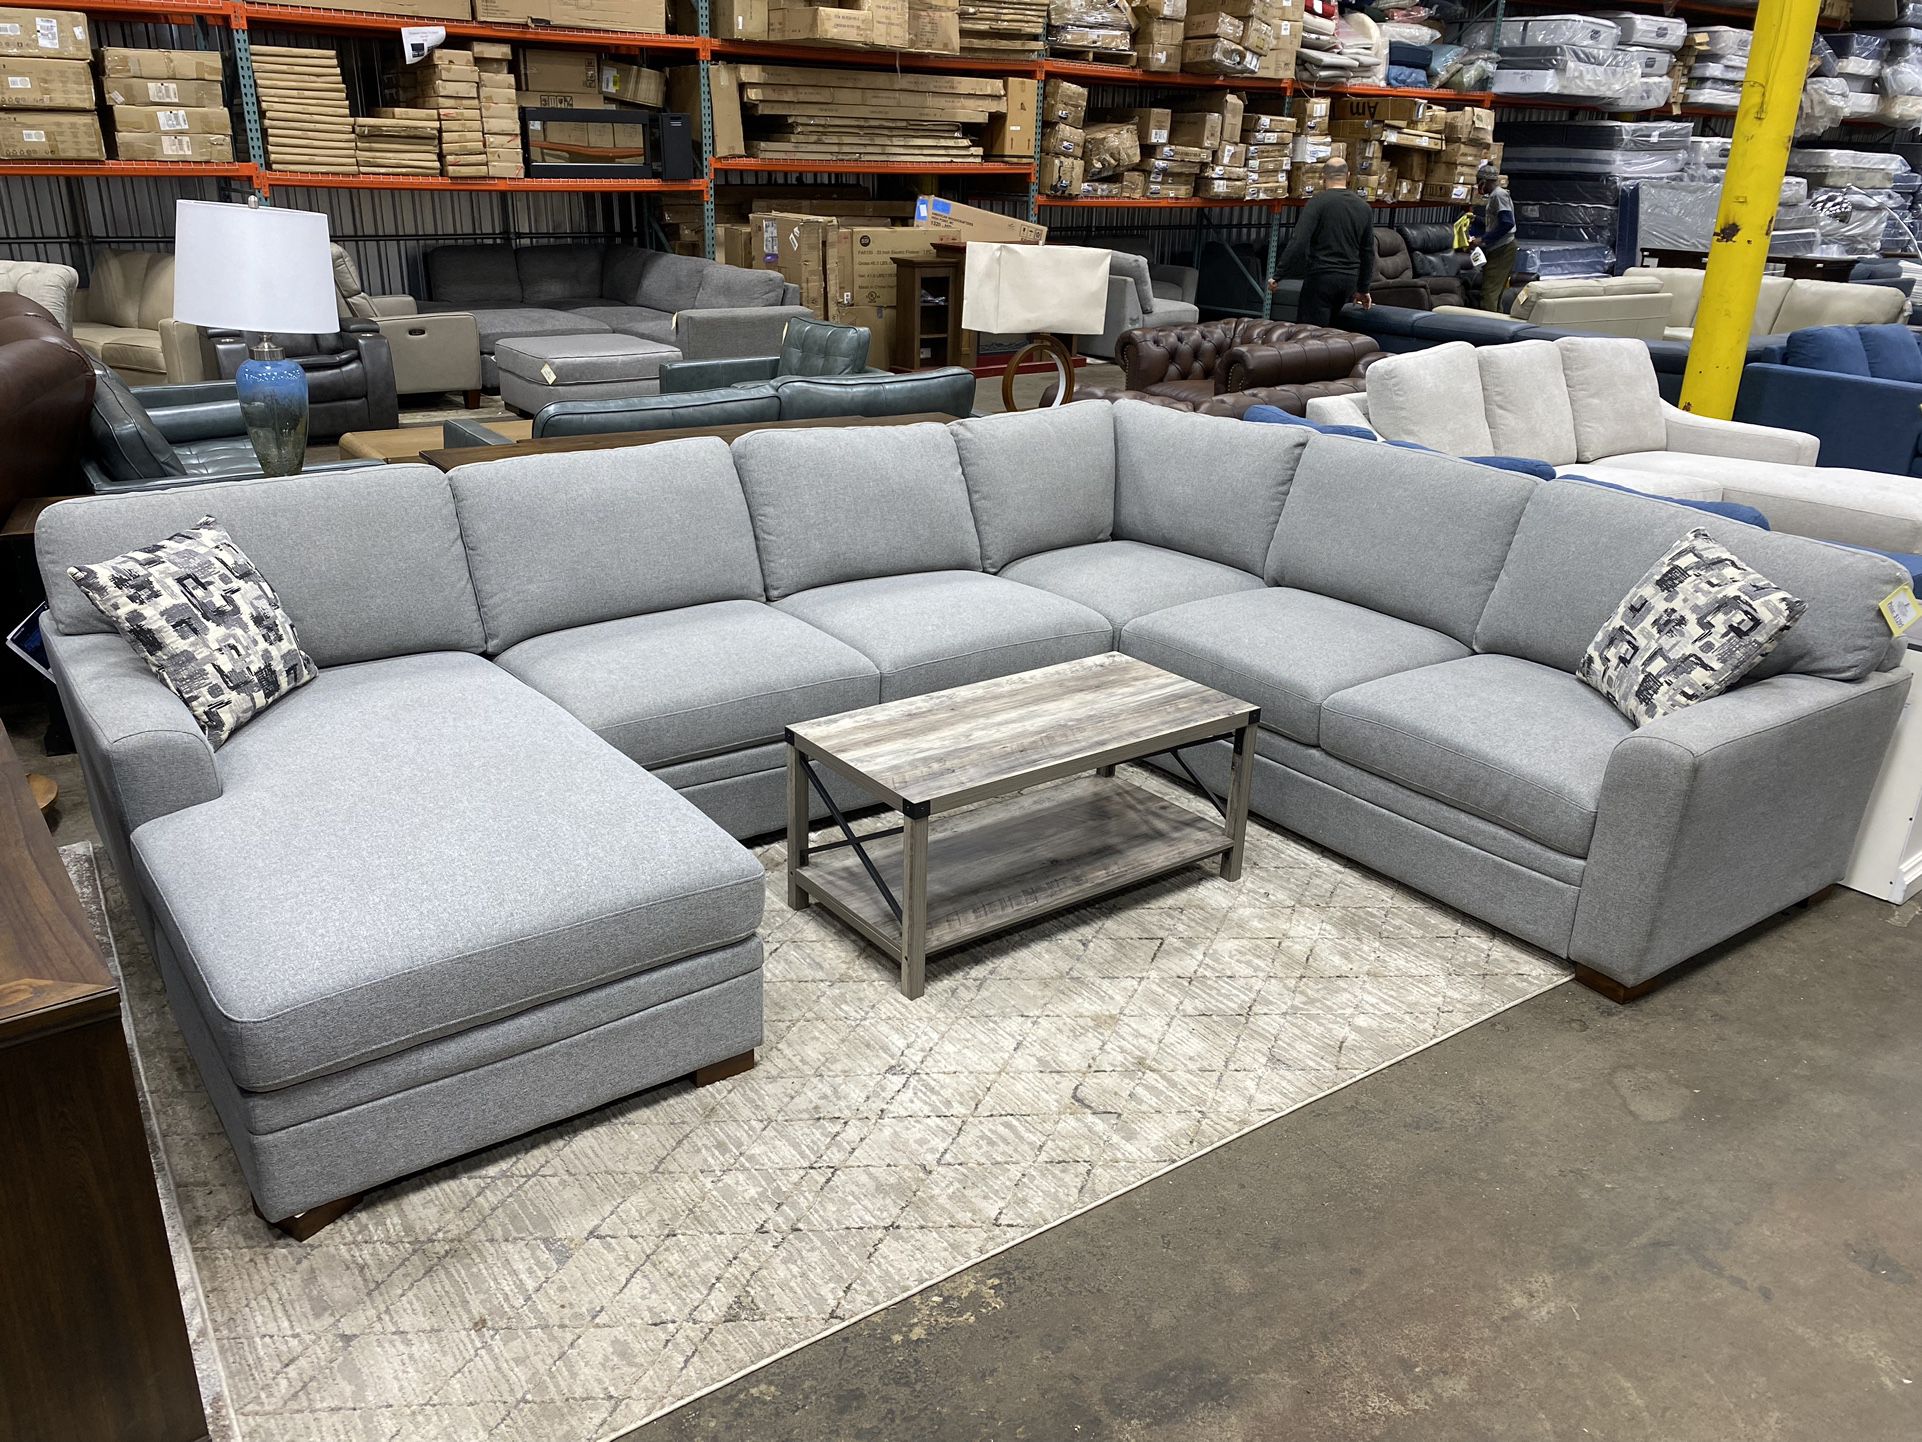 FREE DELIVERY AND INSTALLATION - Thomasville Langdon Fabric Sectional with Coffee and Pillows